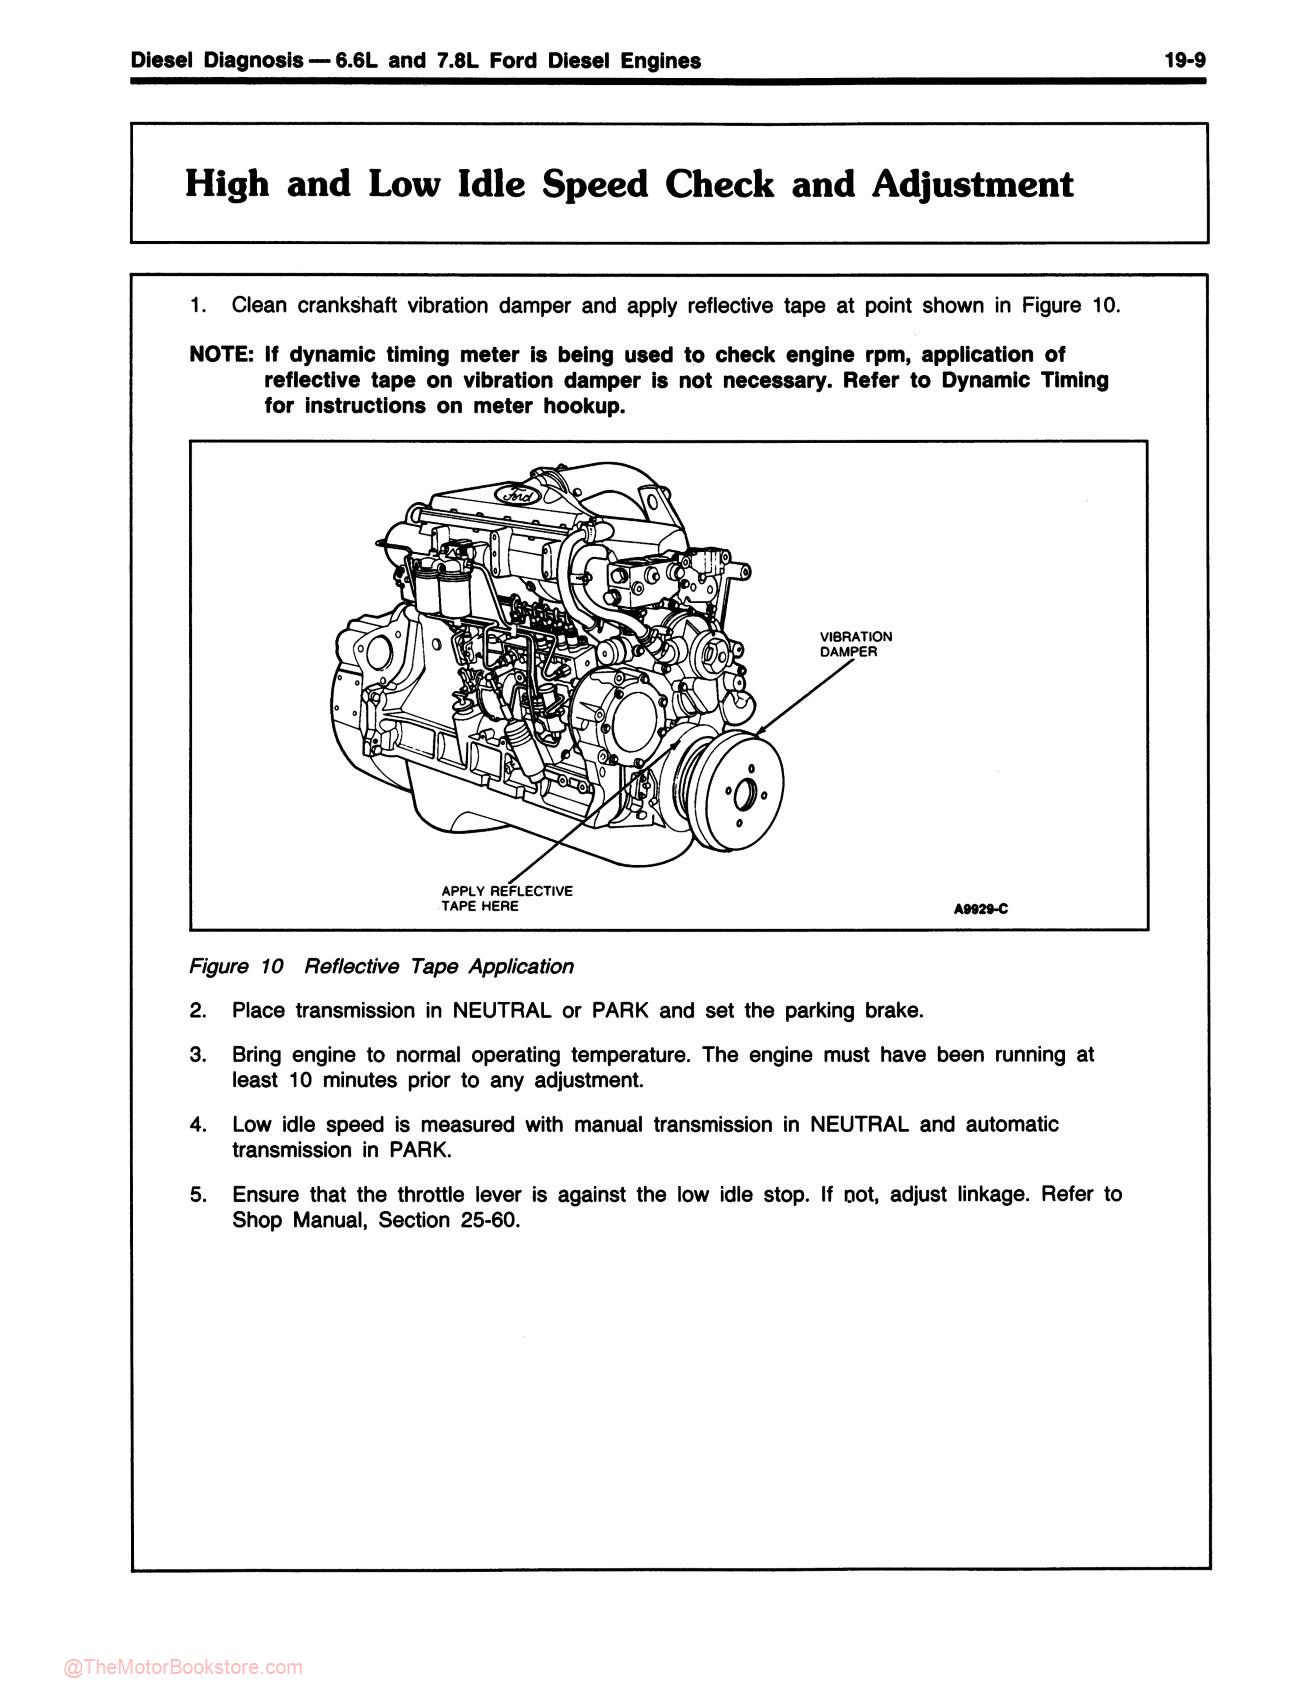 1990 Ford Engine / Emissions Diagnosis Shop Manual - Cars & Trucks - Sample Page 2